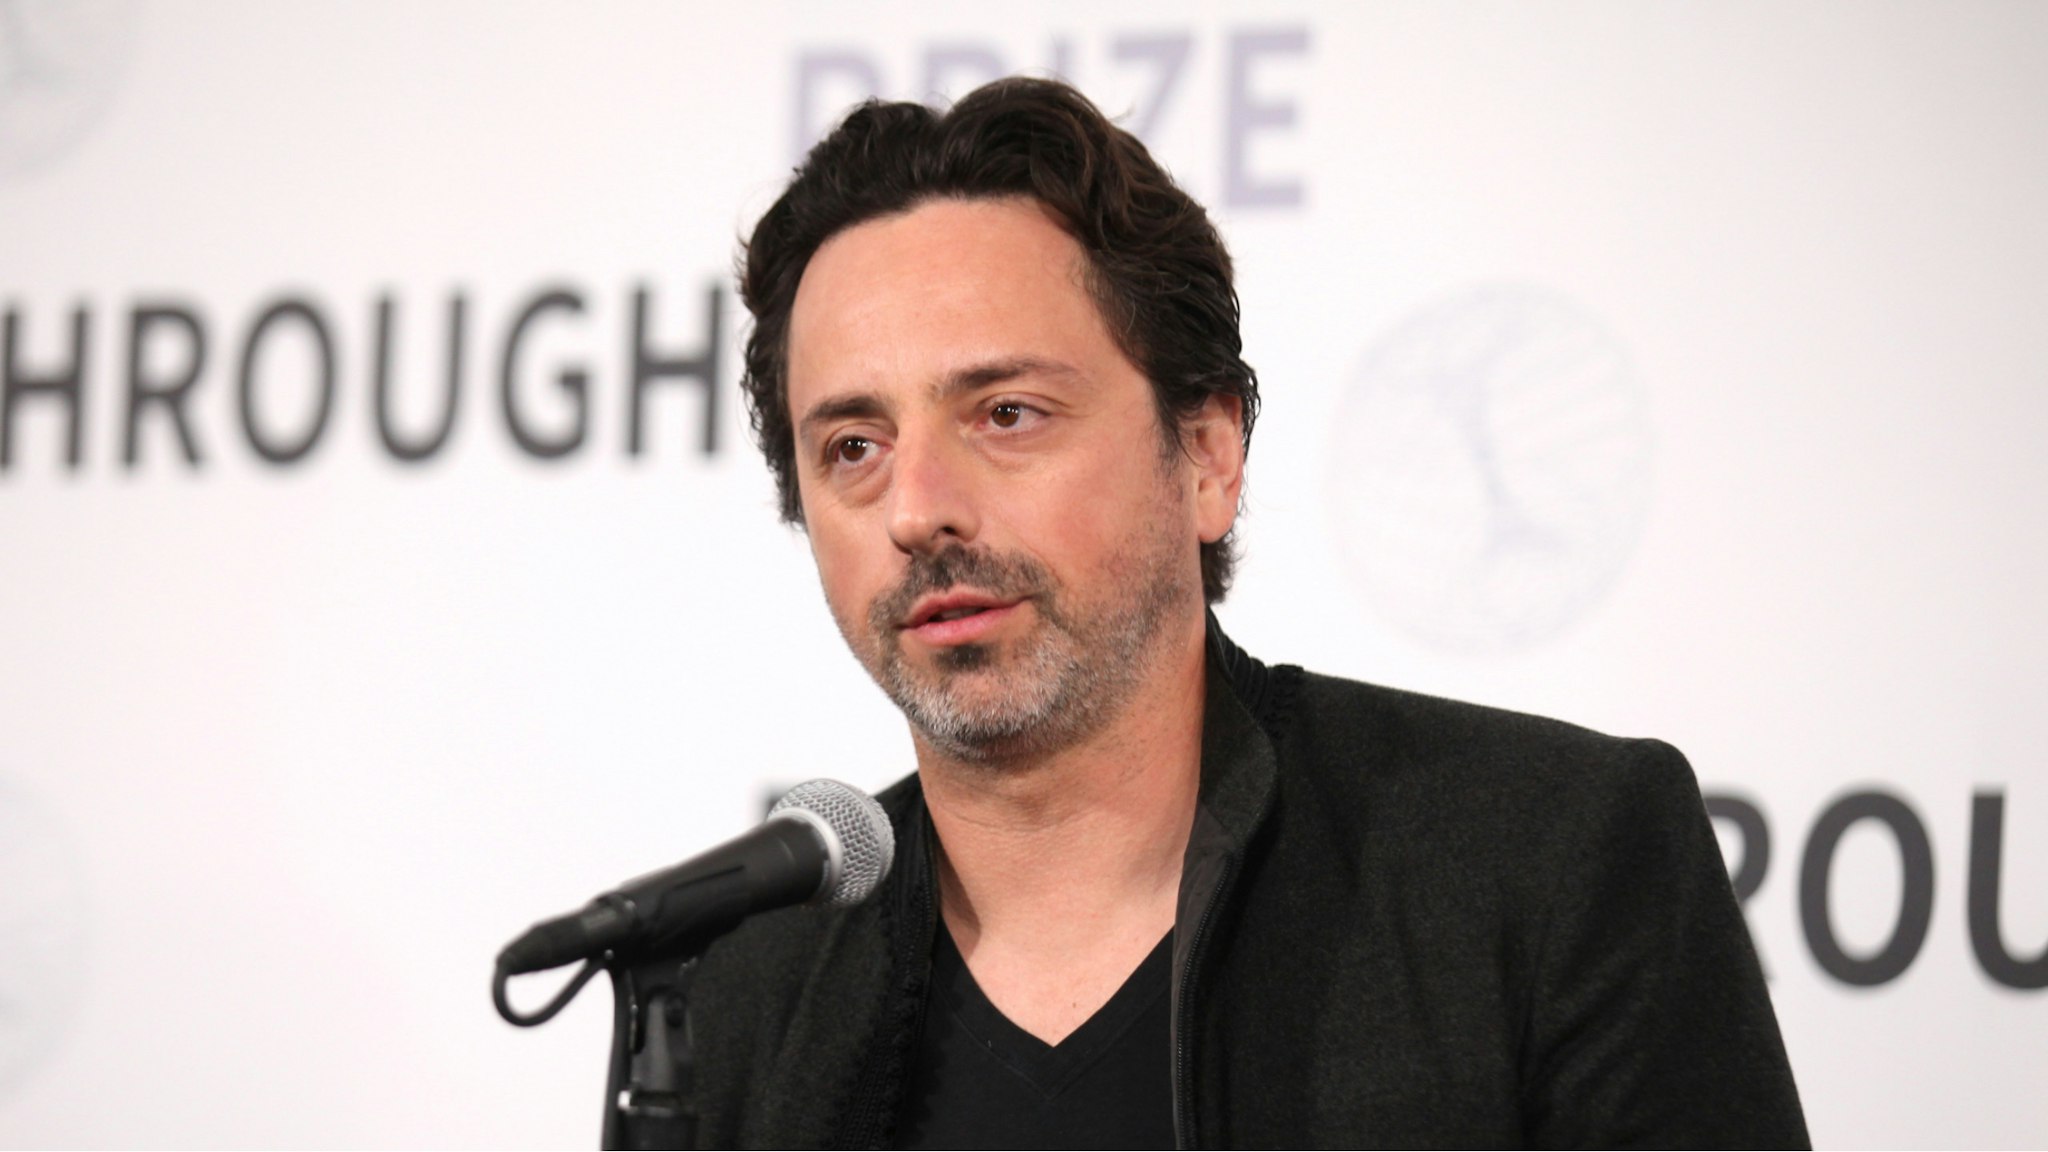 Sergey Brin attends the 2019 Breakthrough Prize at NASA Ames Research Center on November 4, 2018 in Mountain View, California.